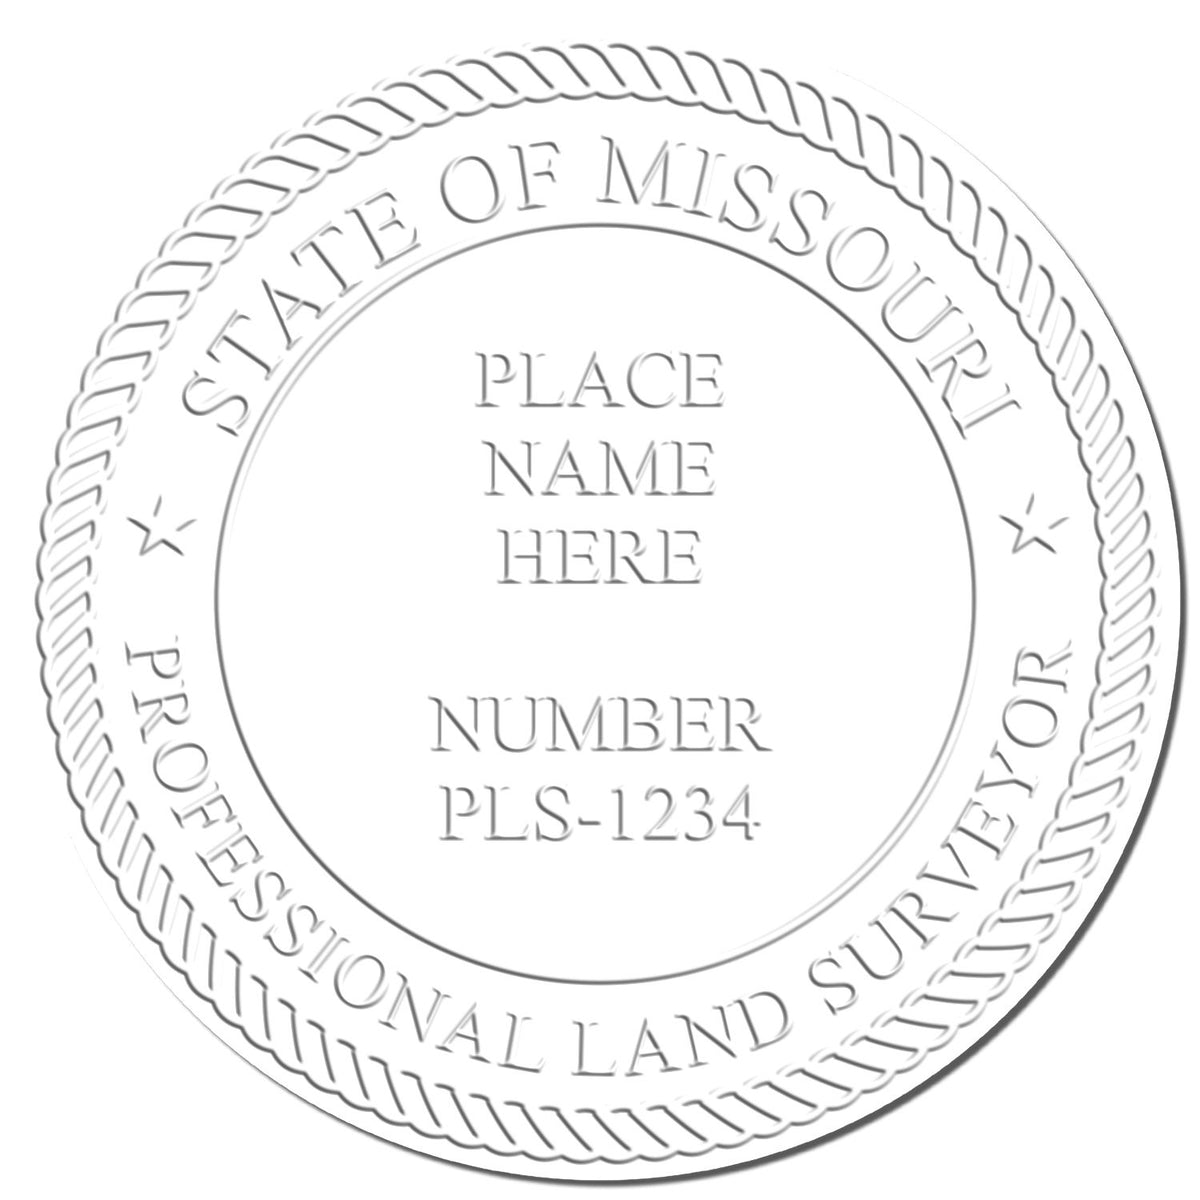 This paper is stamped with a sample imprint of the Extended Long Reach Missouri Surveyor Embosser, signifying its quality and reliability.